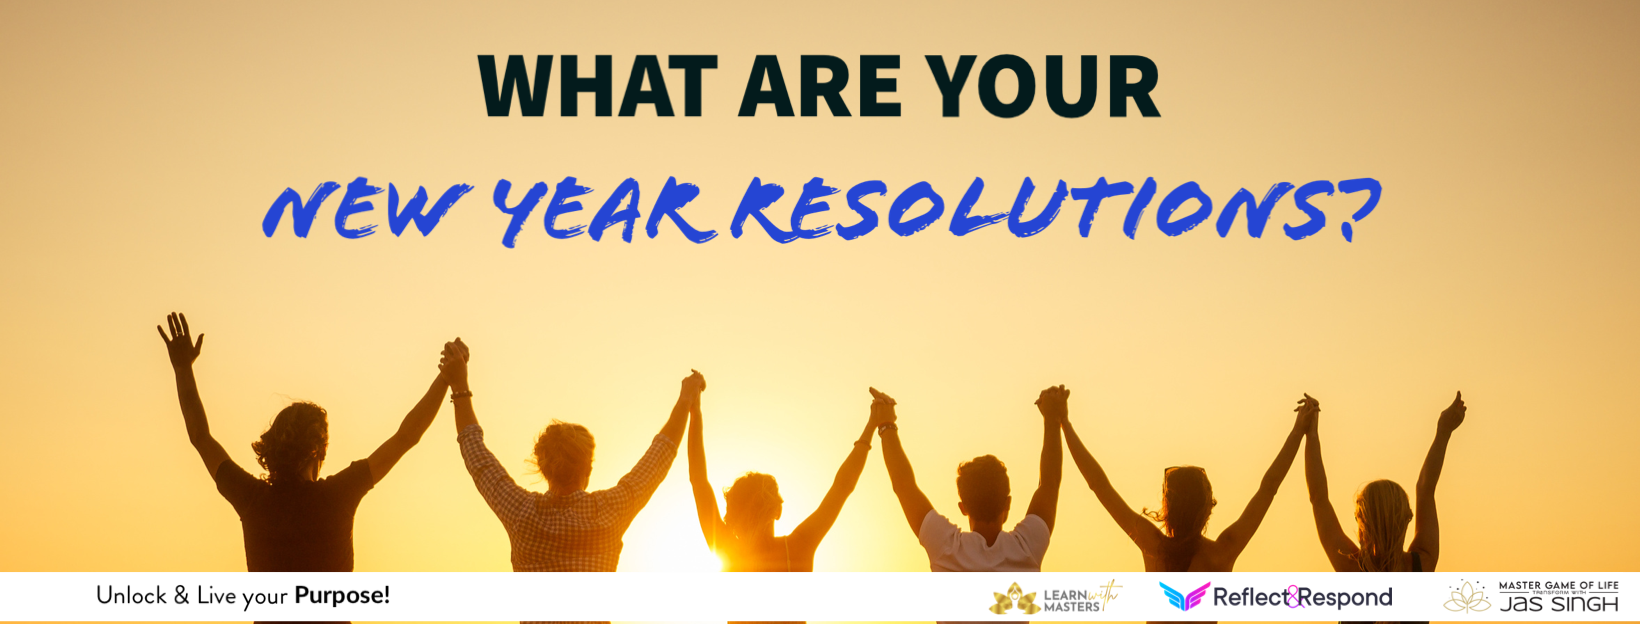 what are your new year resolutions - ReflectandRespond